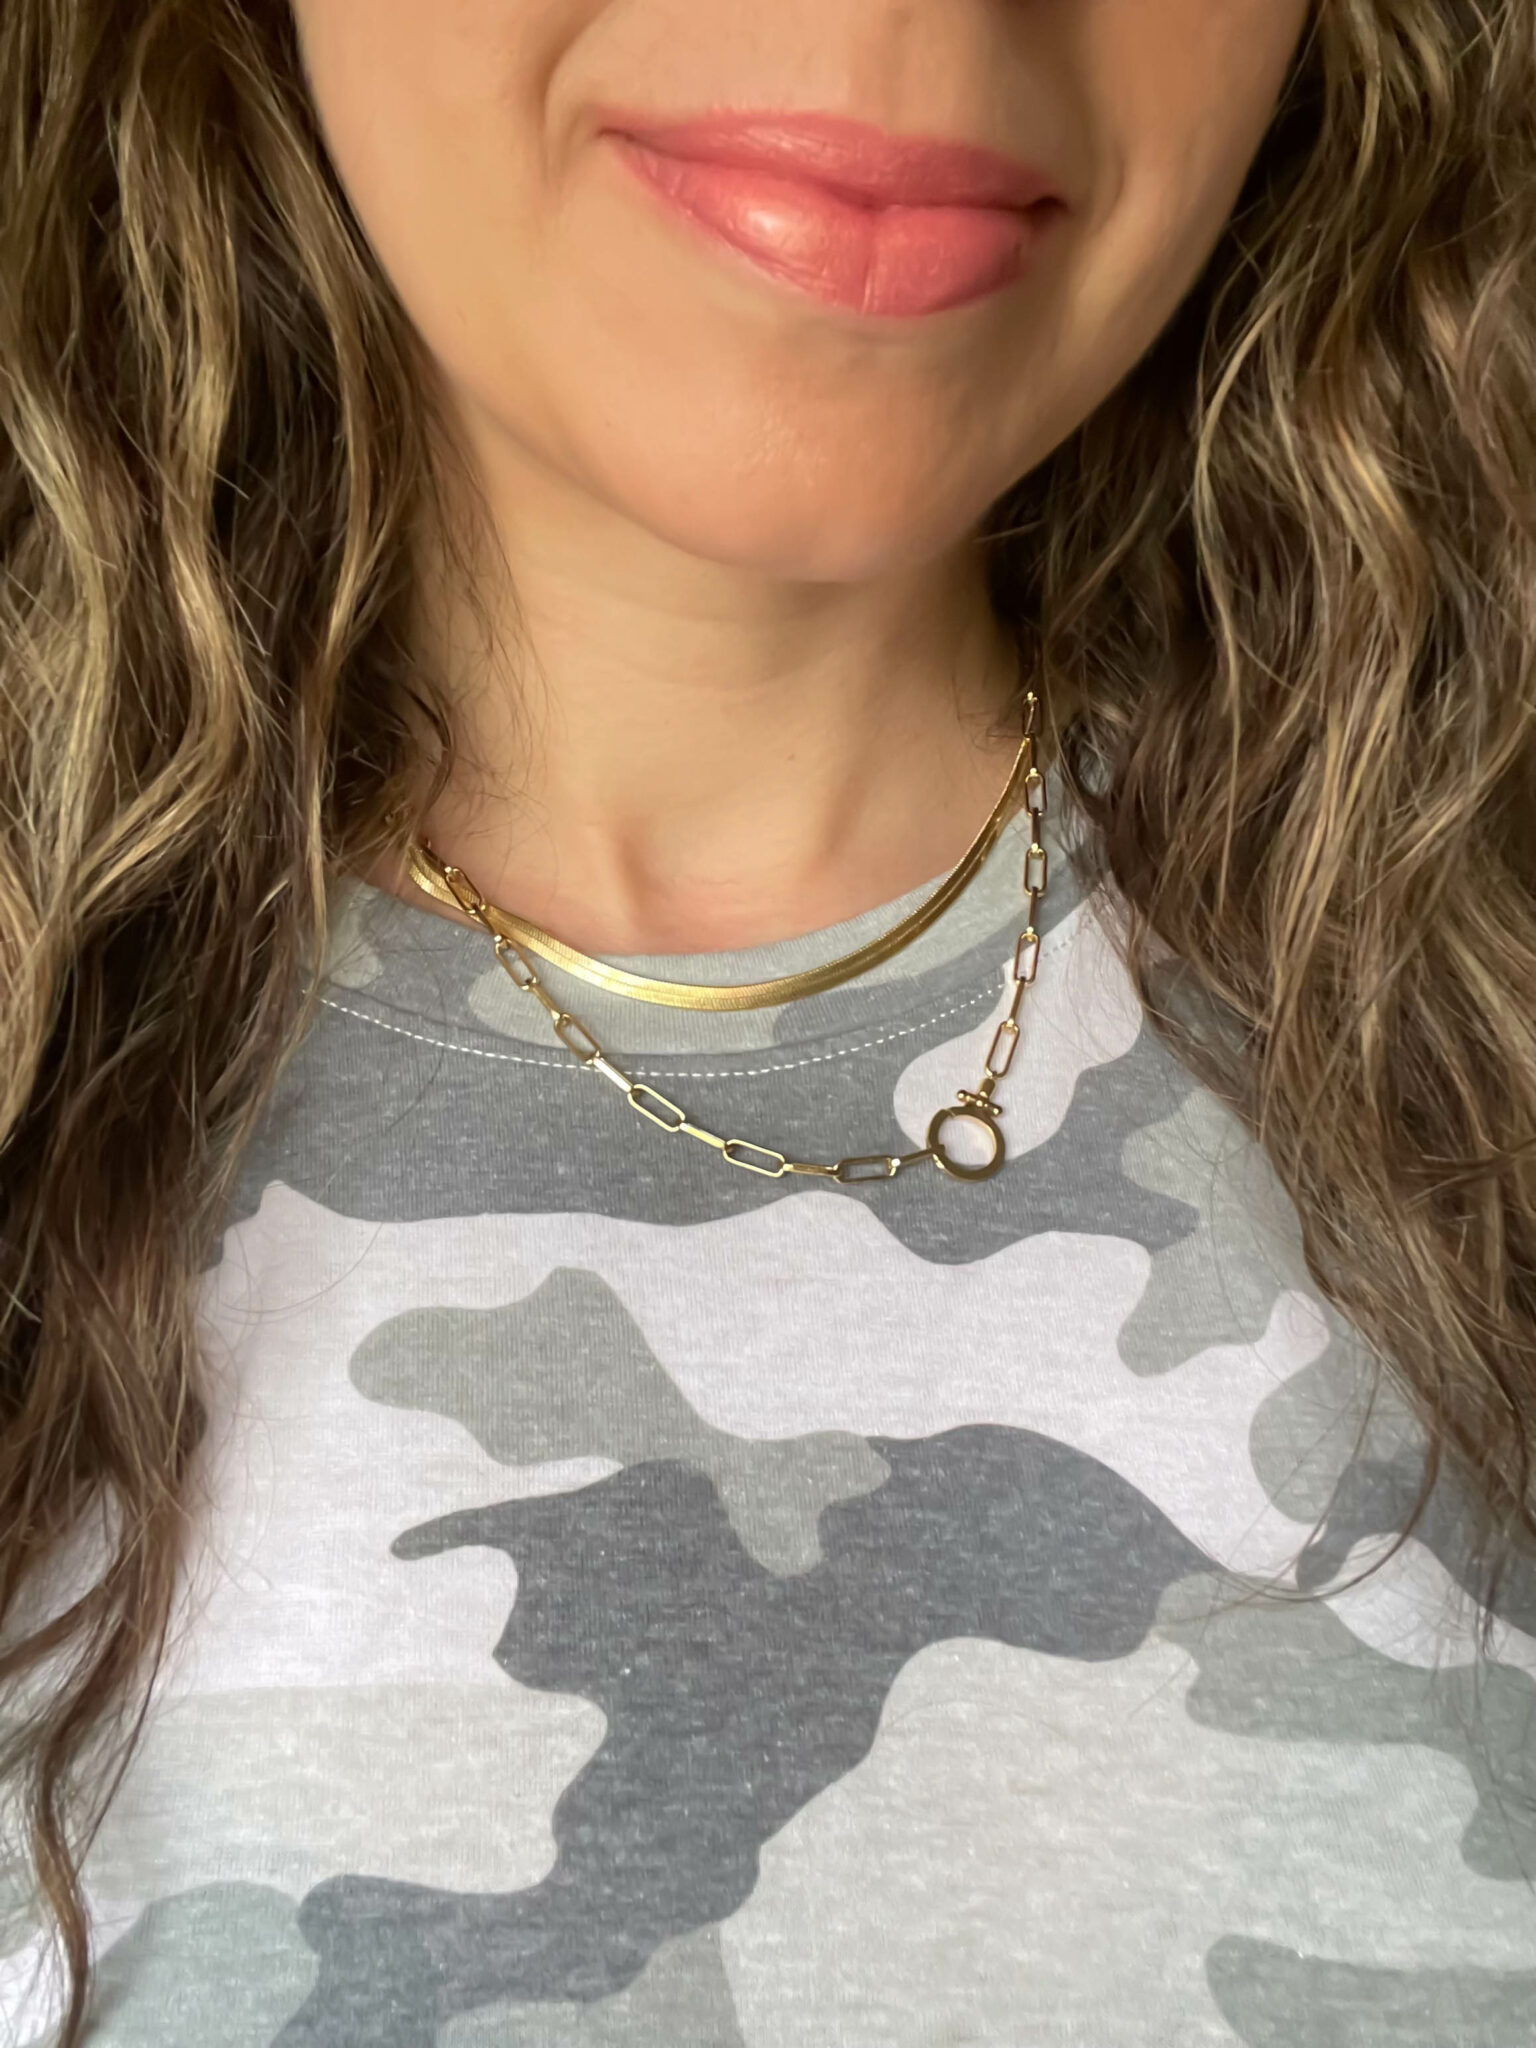 Gorjana Stacking Necklaces by popular Chicago fashion blog, Glass of Glam: image of a woman wearing a Camo shirt and gold Gorjana stacking necklaces. 